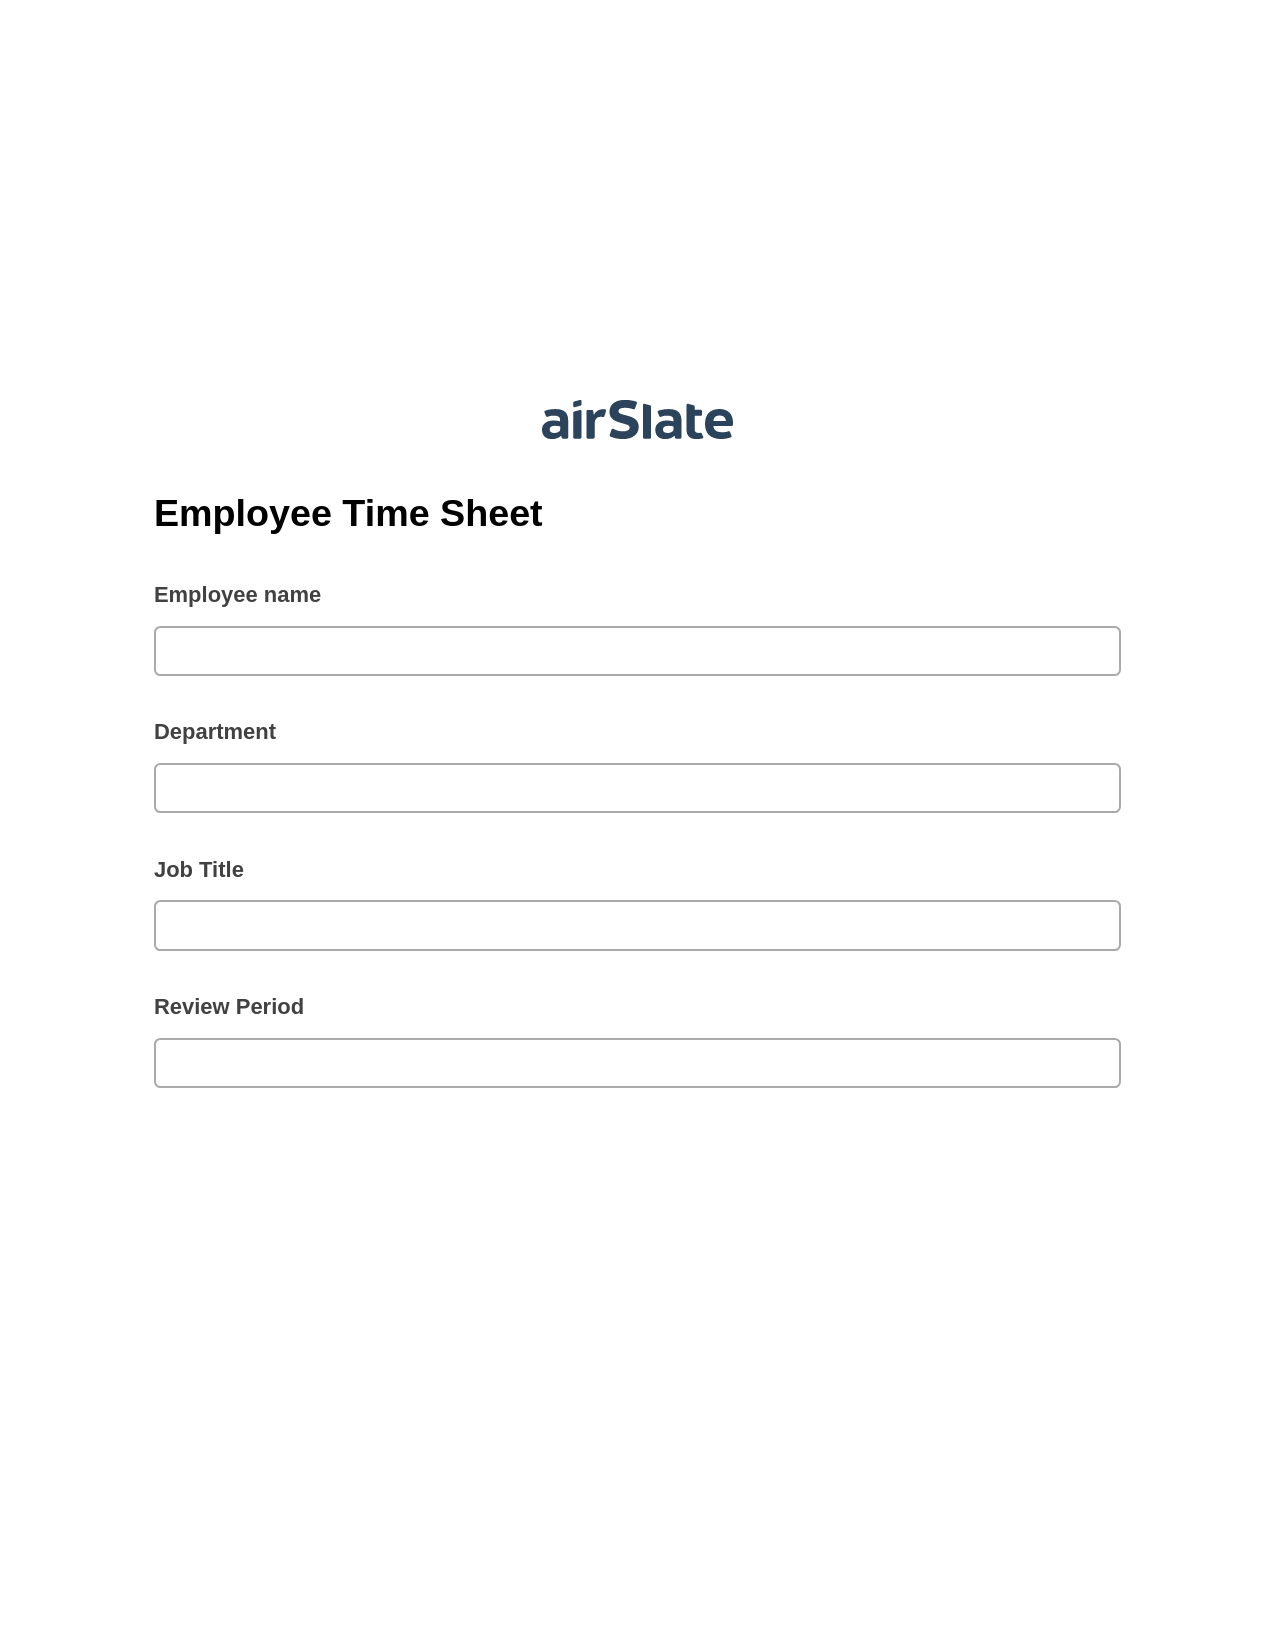 Employee Time Sheet Pre-fill from another Slate Bot, Create Salesforce Records Bot, Export to NetSuite Bot